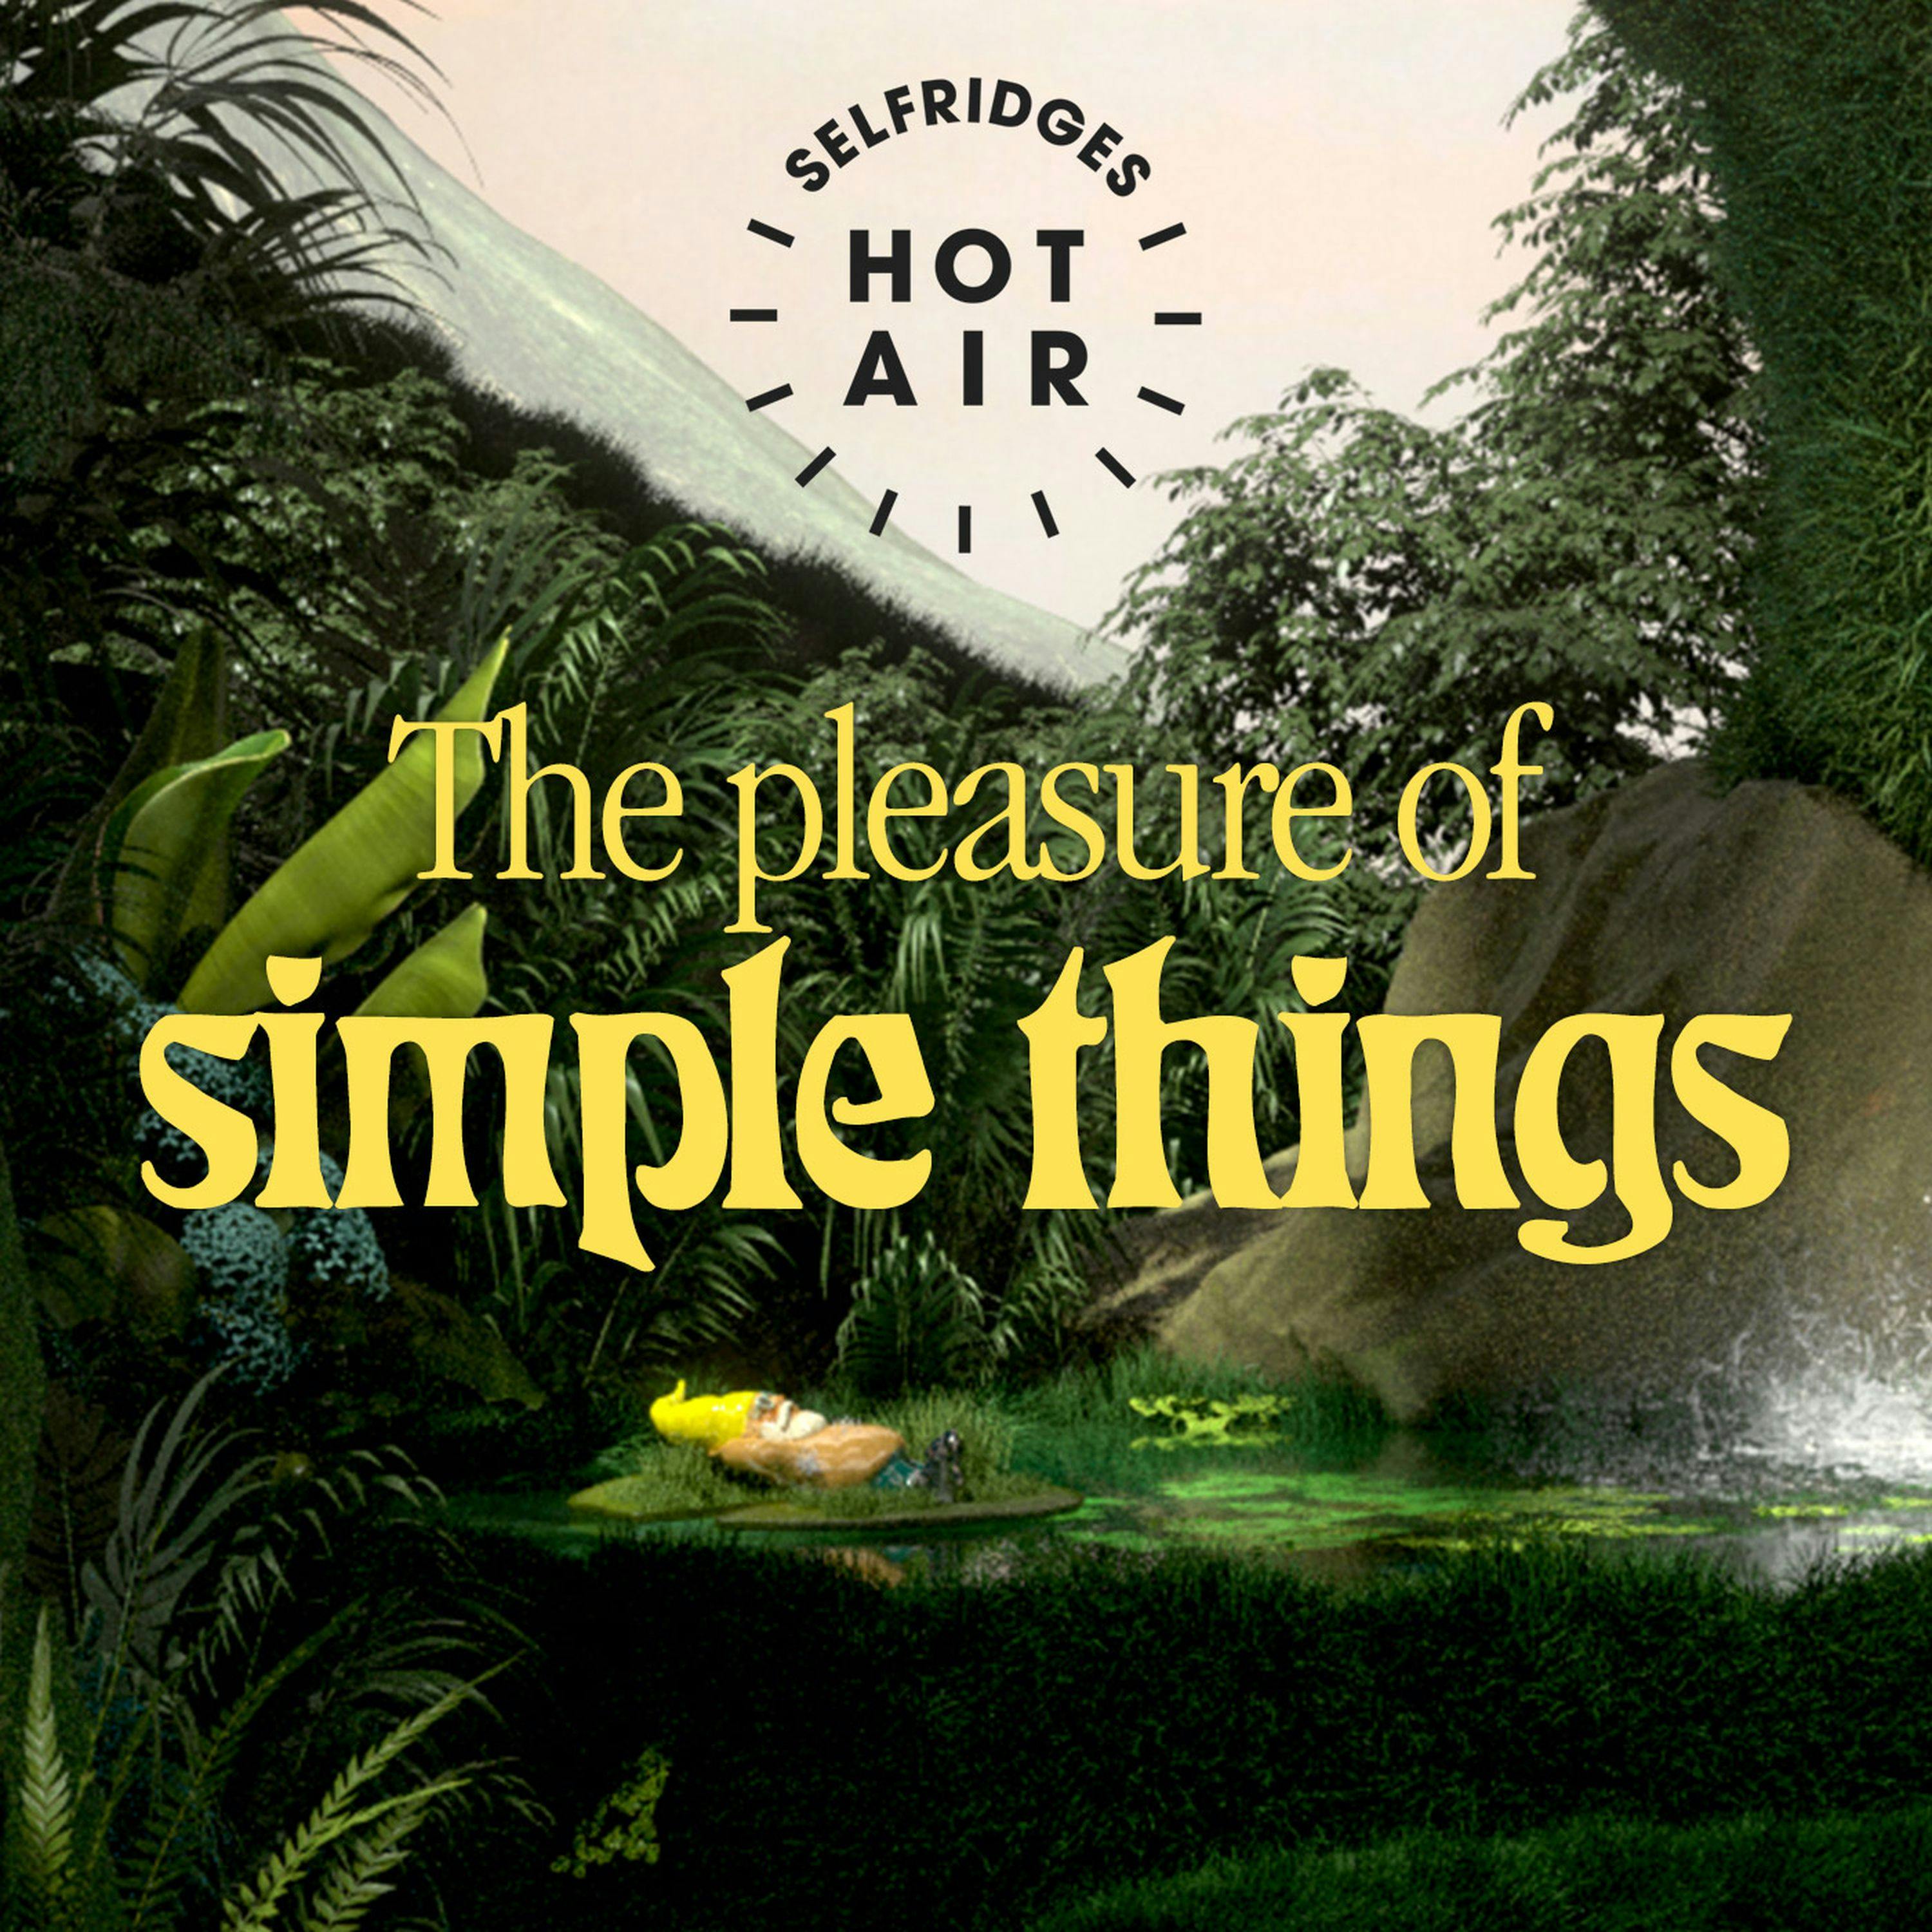 Good Nature: The pleasure of simple things